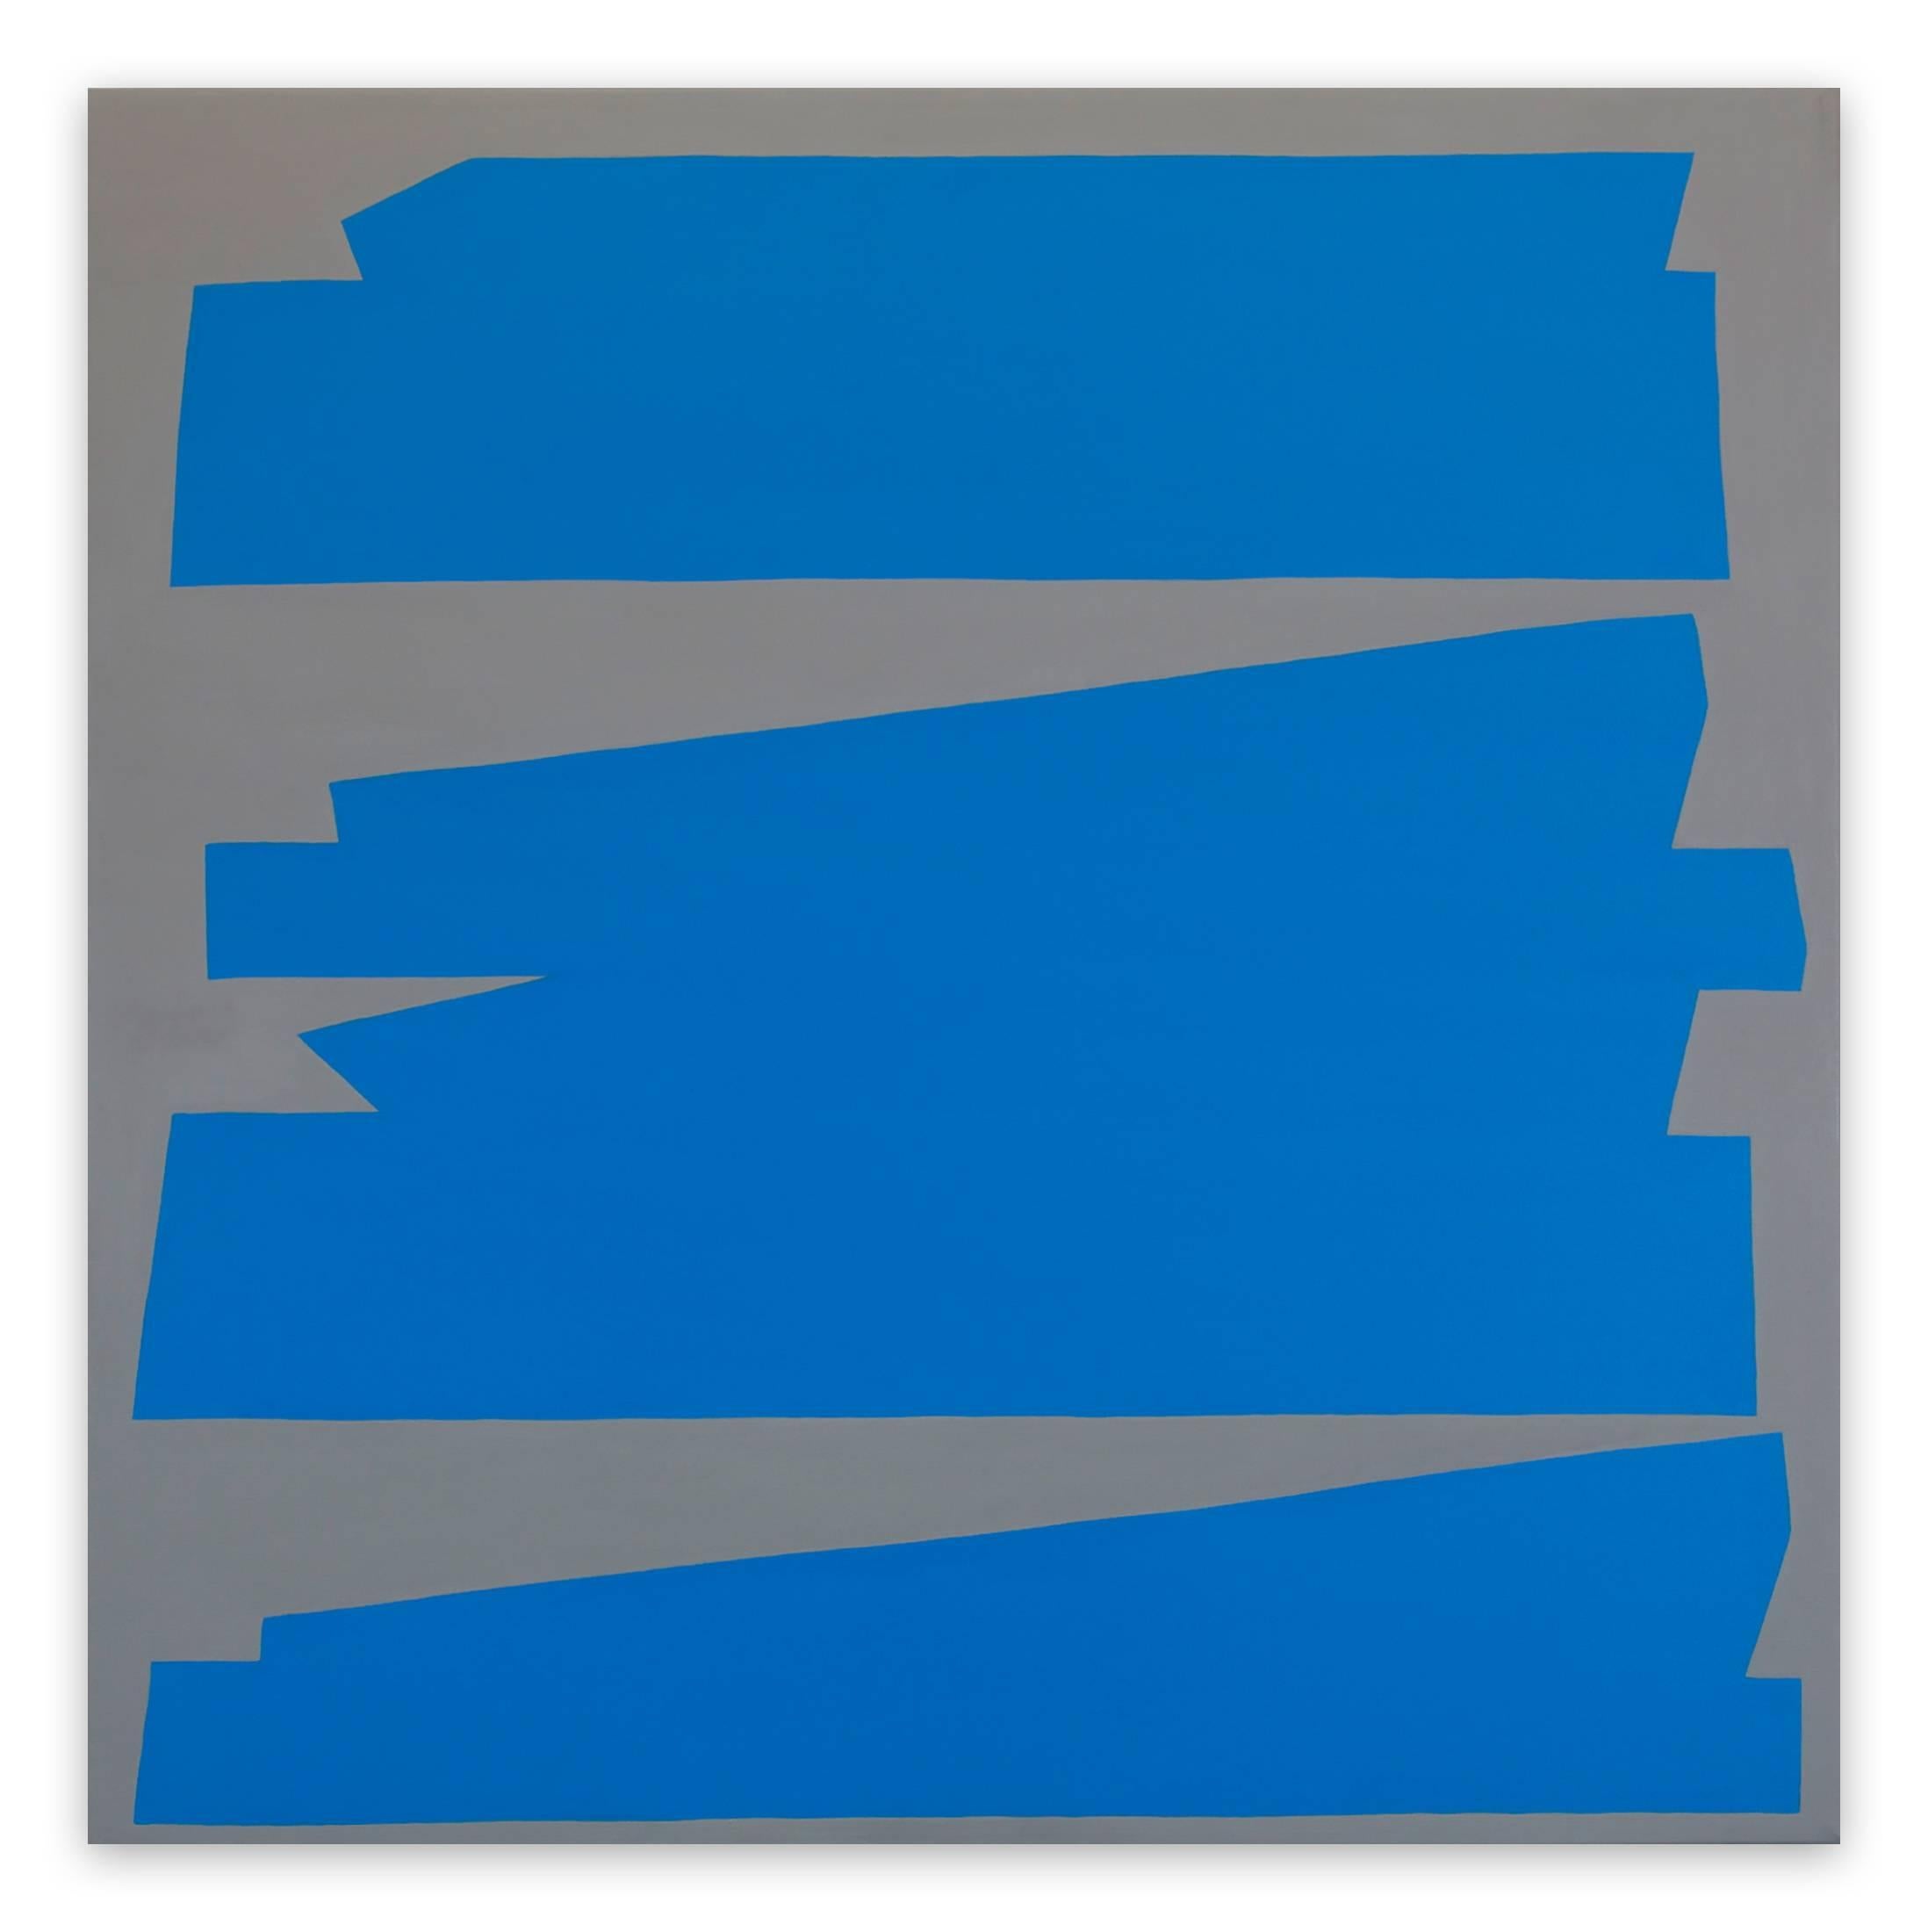 Cut-Up Canvas I.2 (Abstract Painting)

Acrylic on canvas - Unframed

Pedersen works with acrylic paint.

When painting a composition, she tends toward a limited color palette, often reducing the composition to minimal, hard-edged shapes on